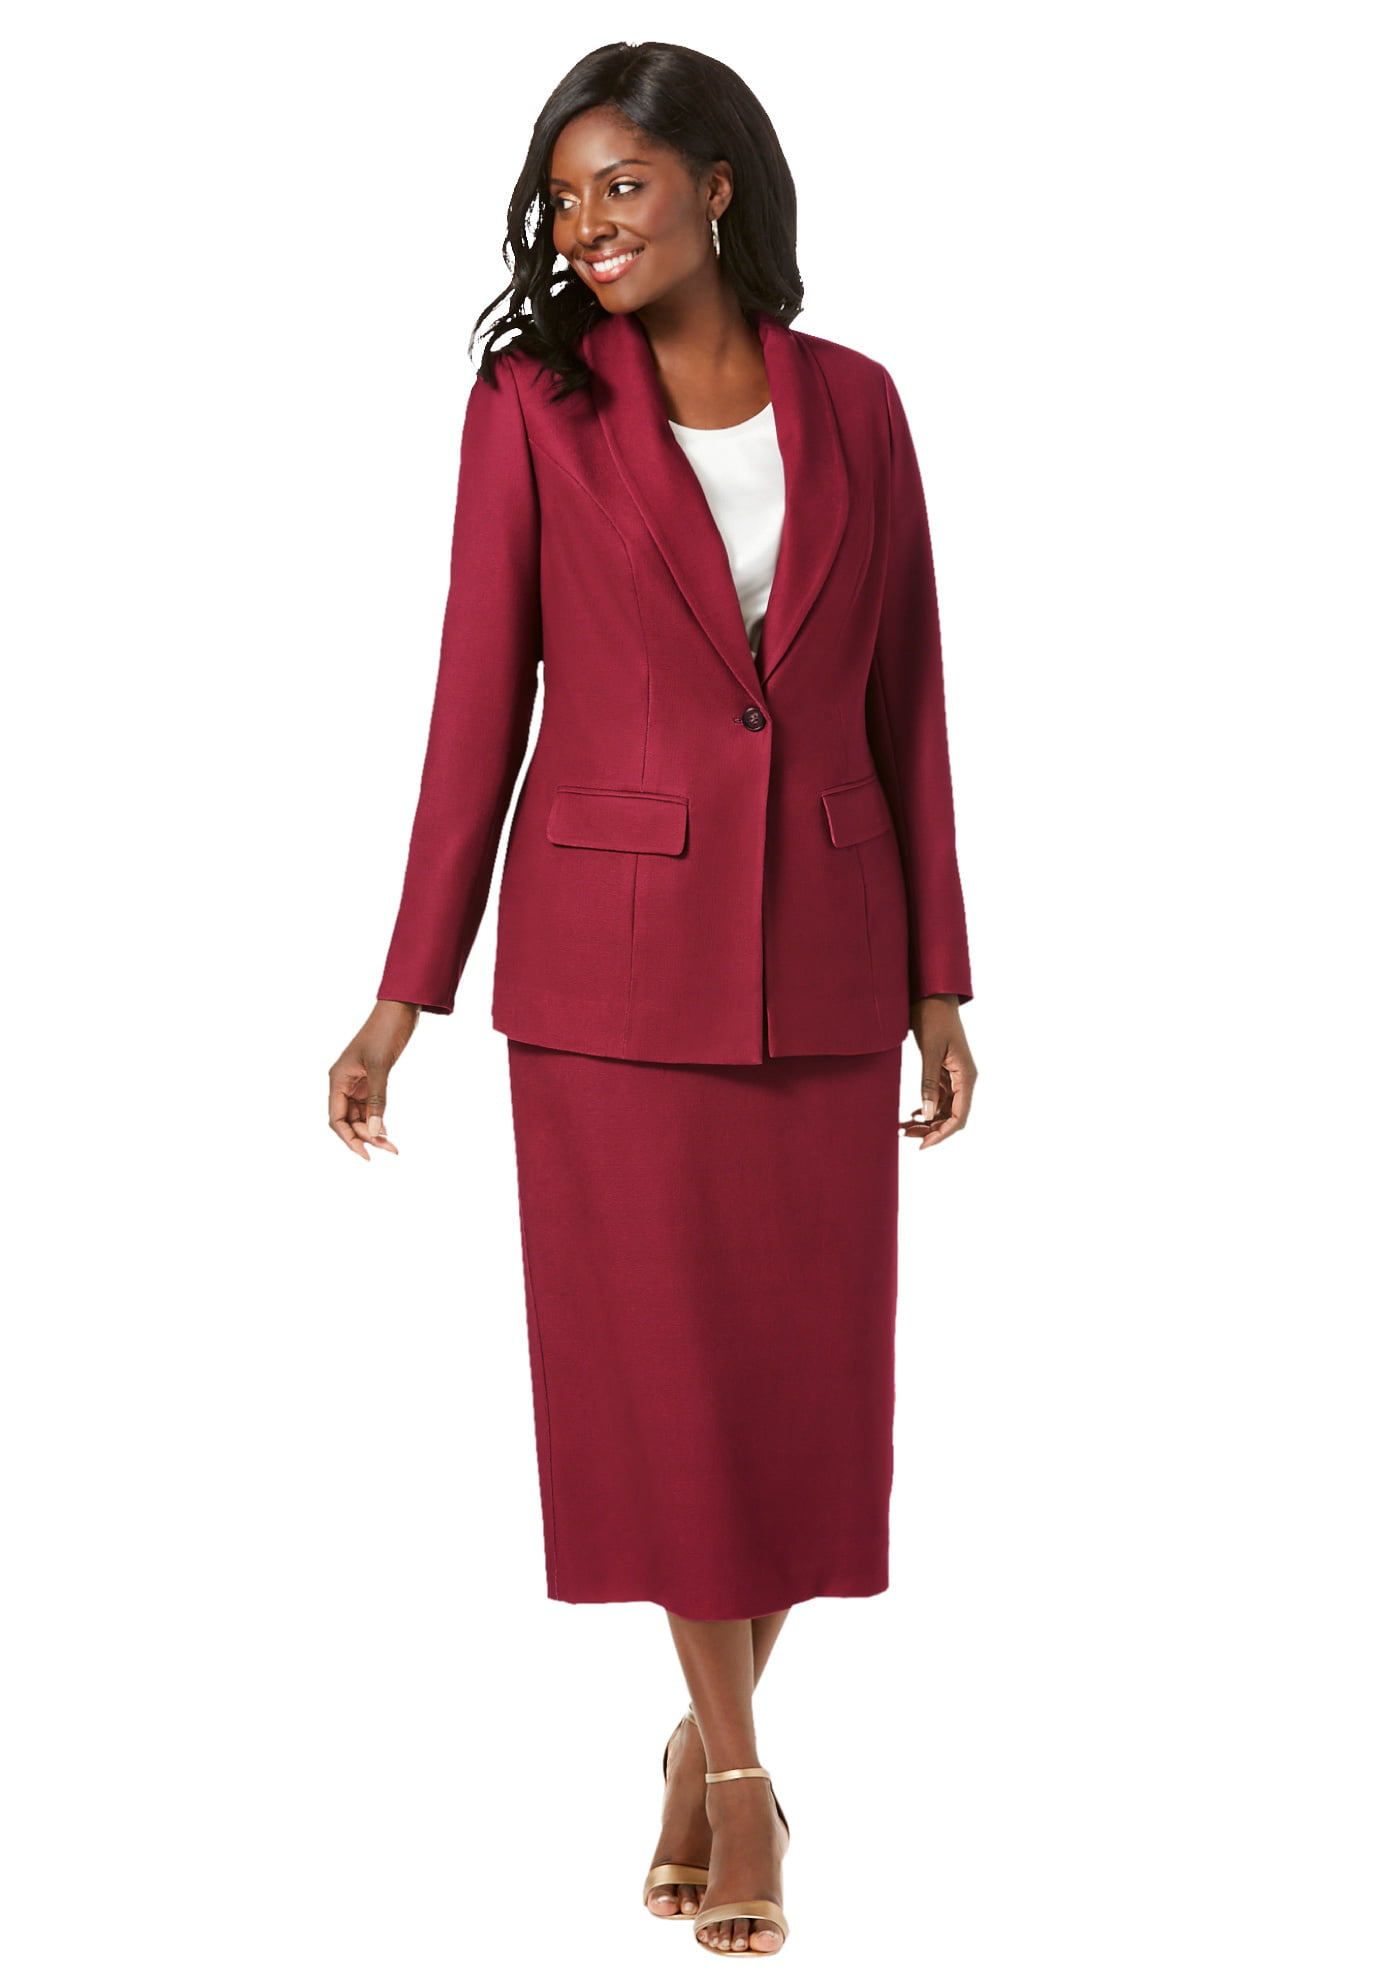 Jessica London Women's Plus Size Single-Breasted Skirt Suit Set - 22, Rich Burgundy Red